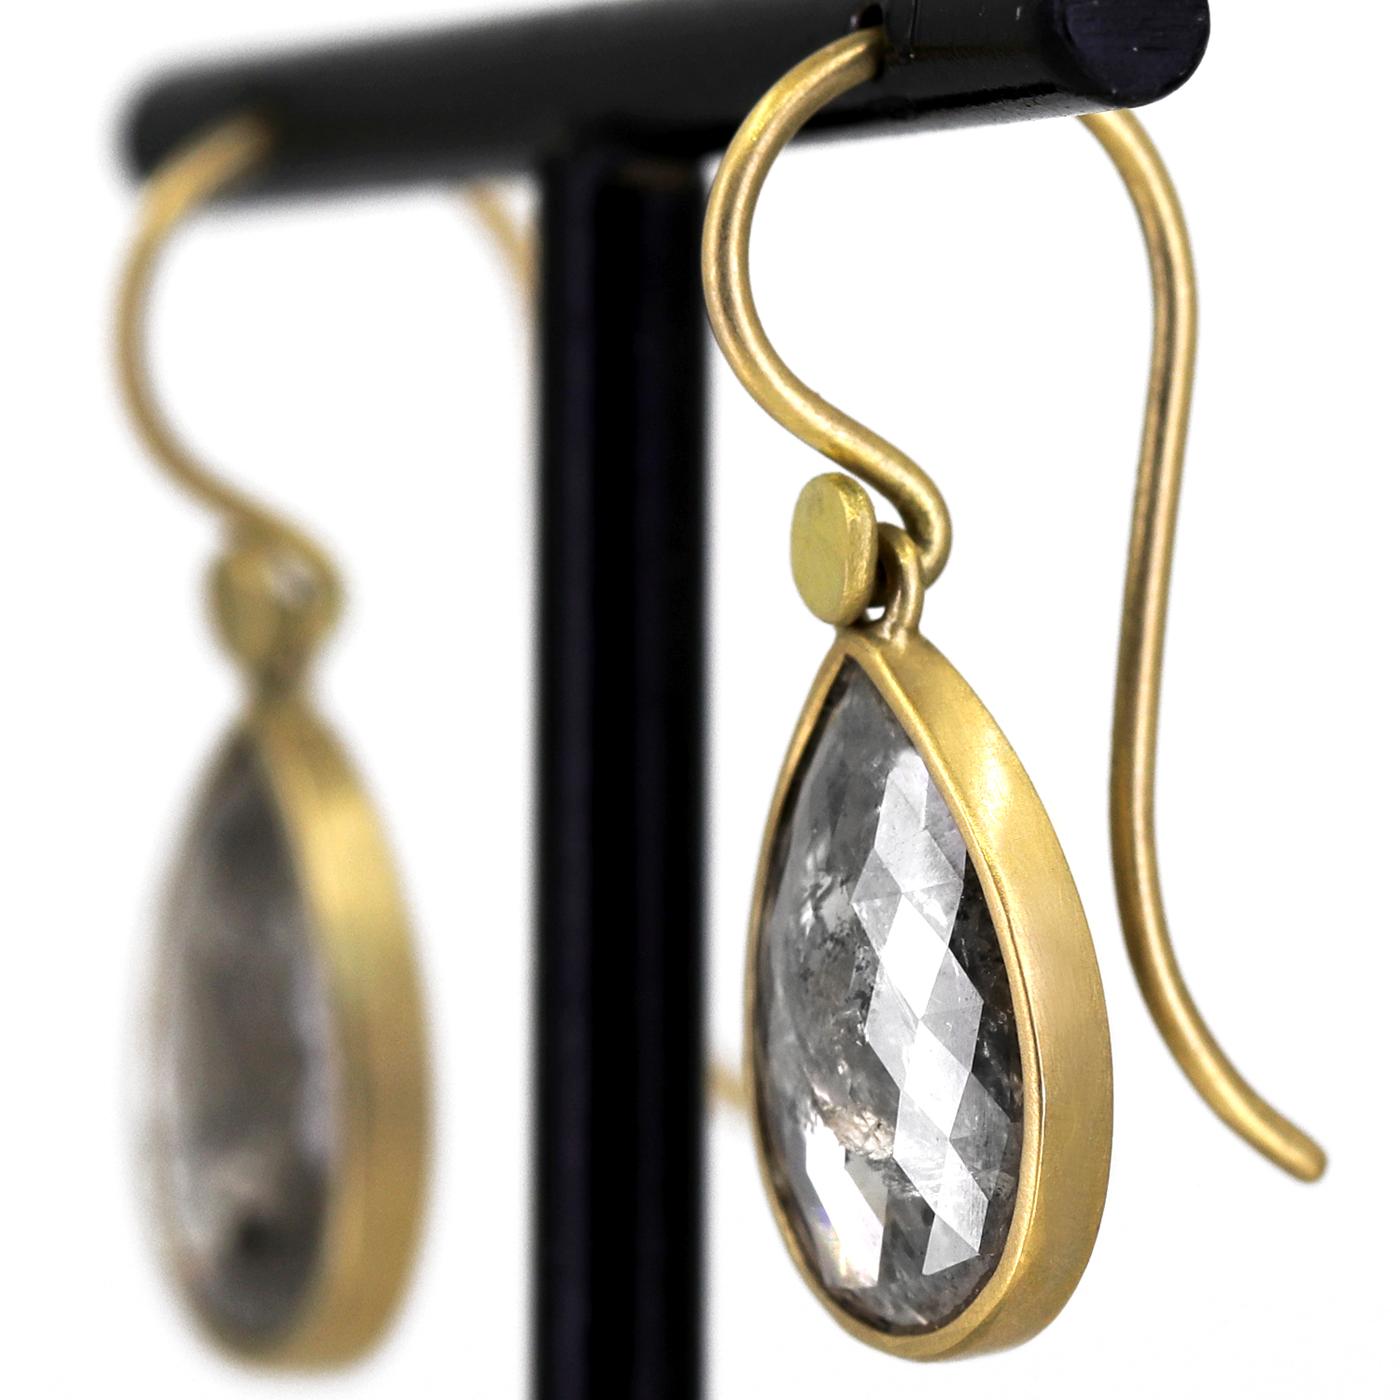 One of a Kind Drop Earrings by award-winning jewelry maker Lola Brooks, hand-fabricated in her signature-finished 18k yellow gold featuring a gorgeous matched pair of shimmering rose-cut salt and pepper diamond drops totaling 3.60 carats, each